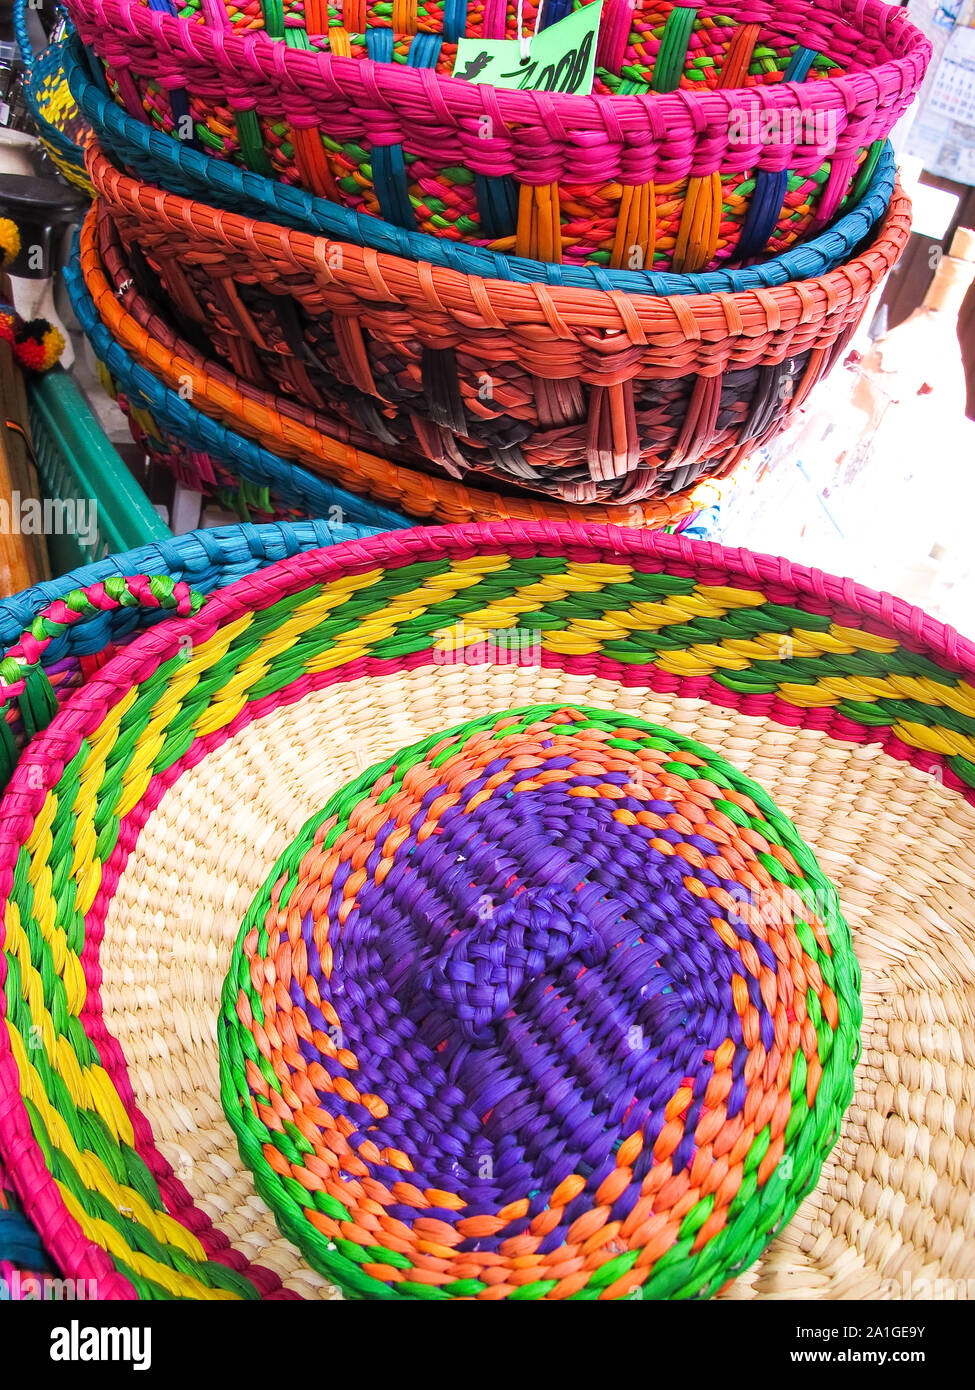 Hats in a traditional Andean market products. Chile, Stock Photo